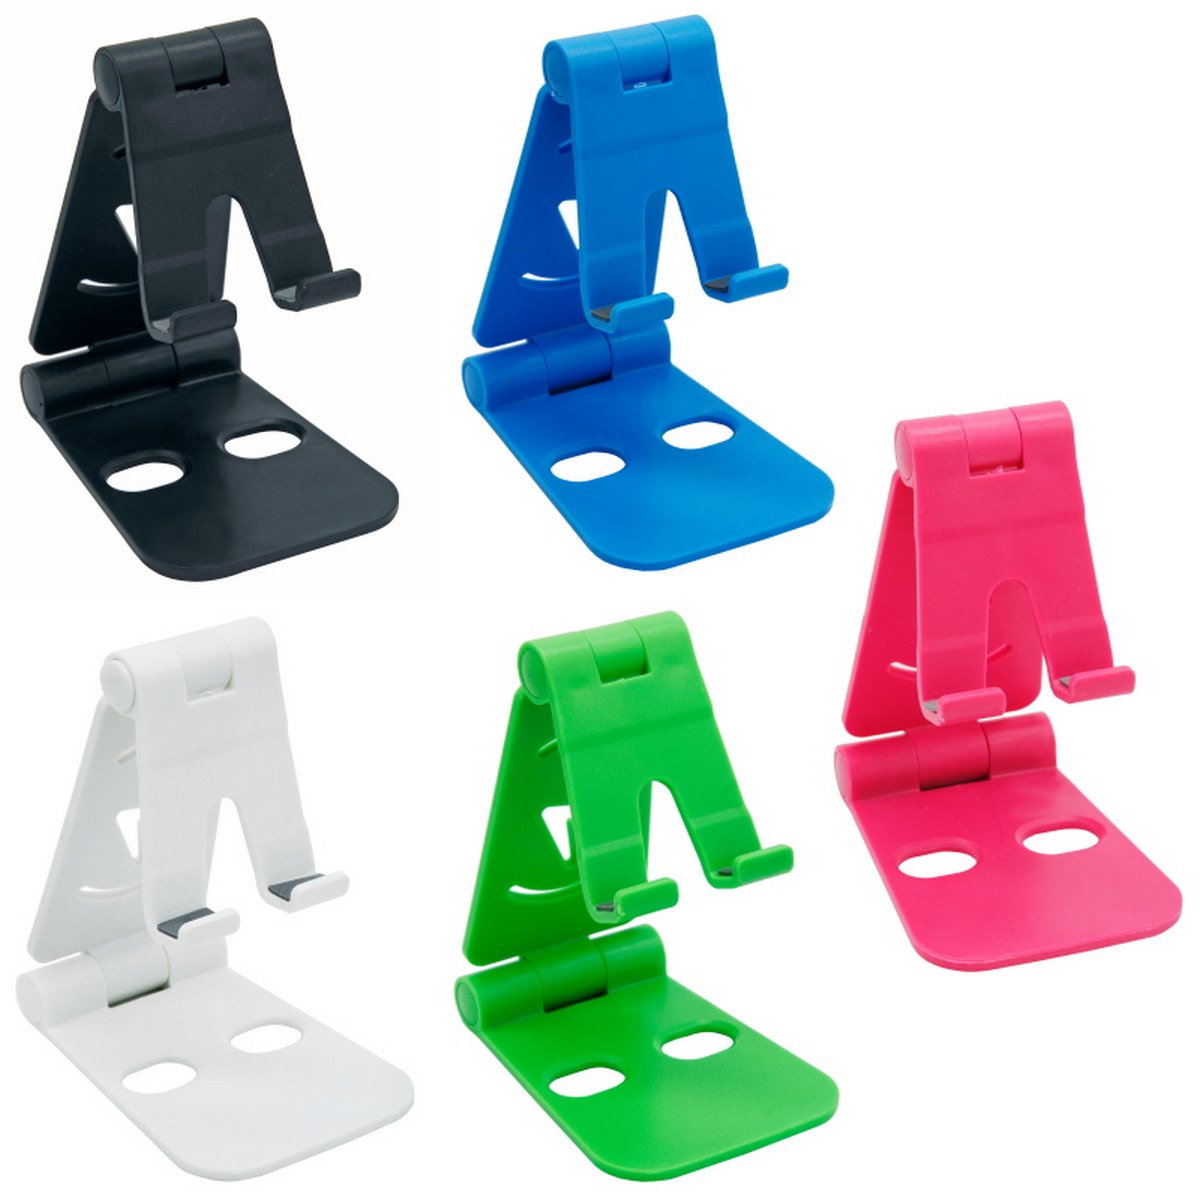 jags-mumbai Office Display Stands Mobile Holder Fold Stand